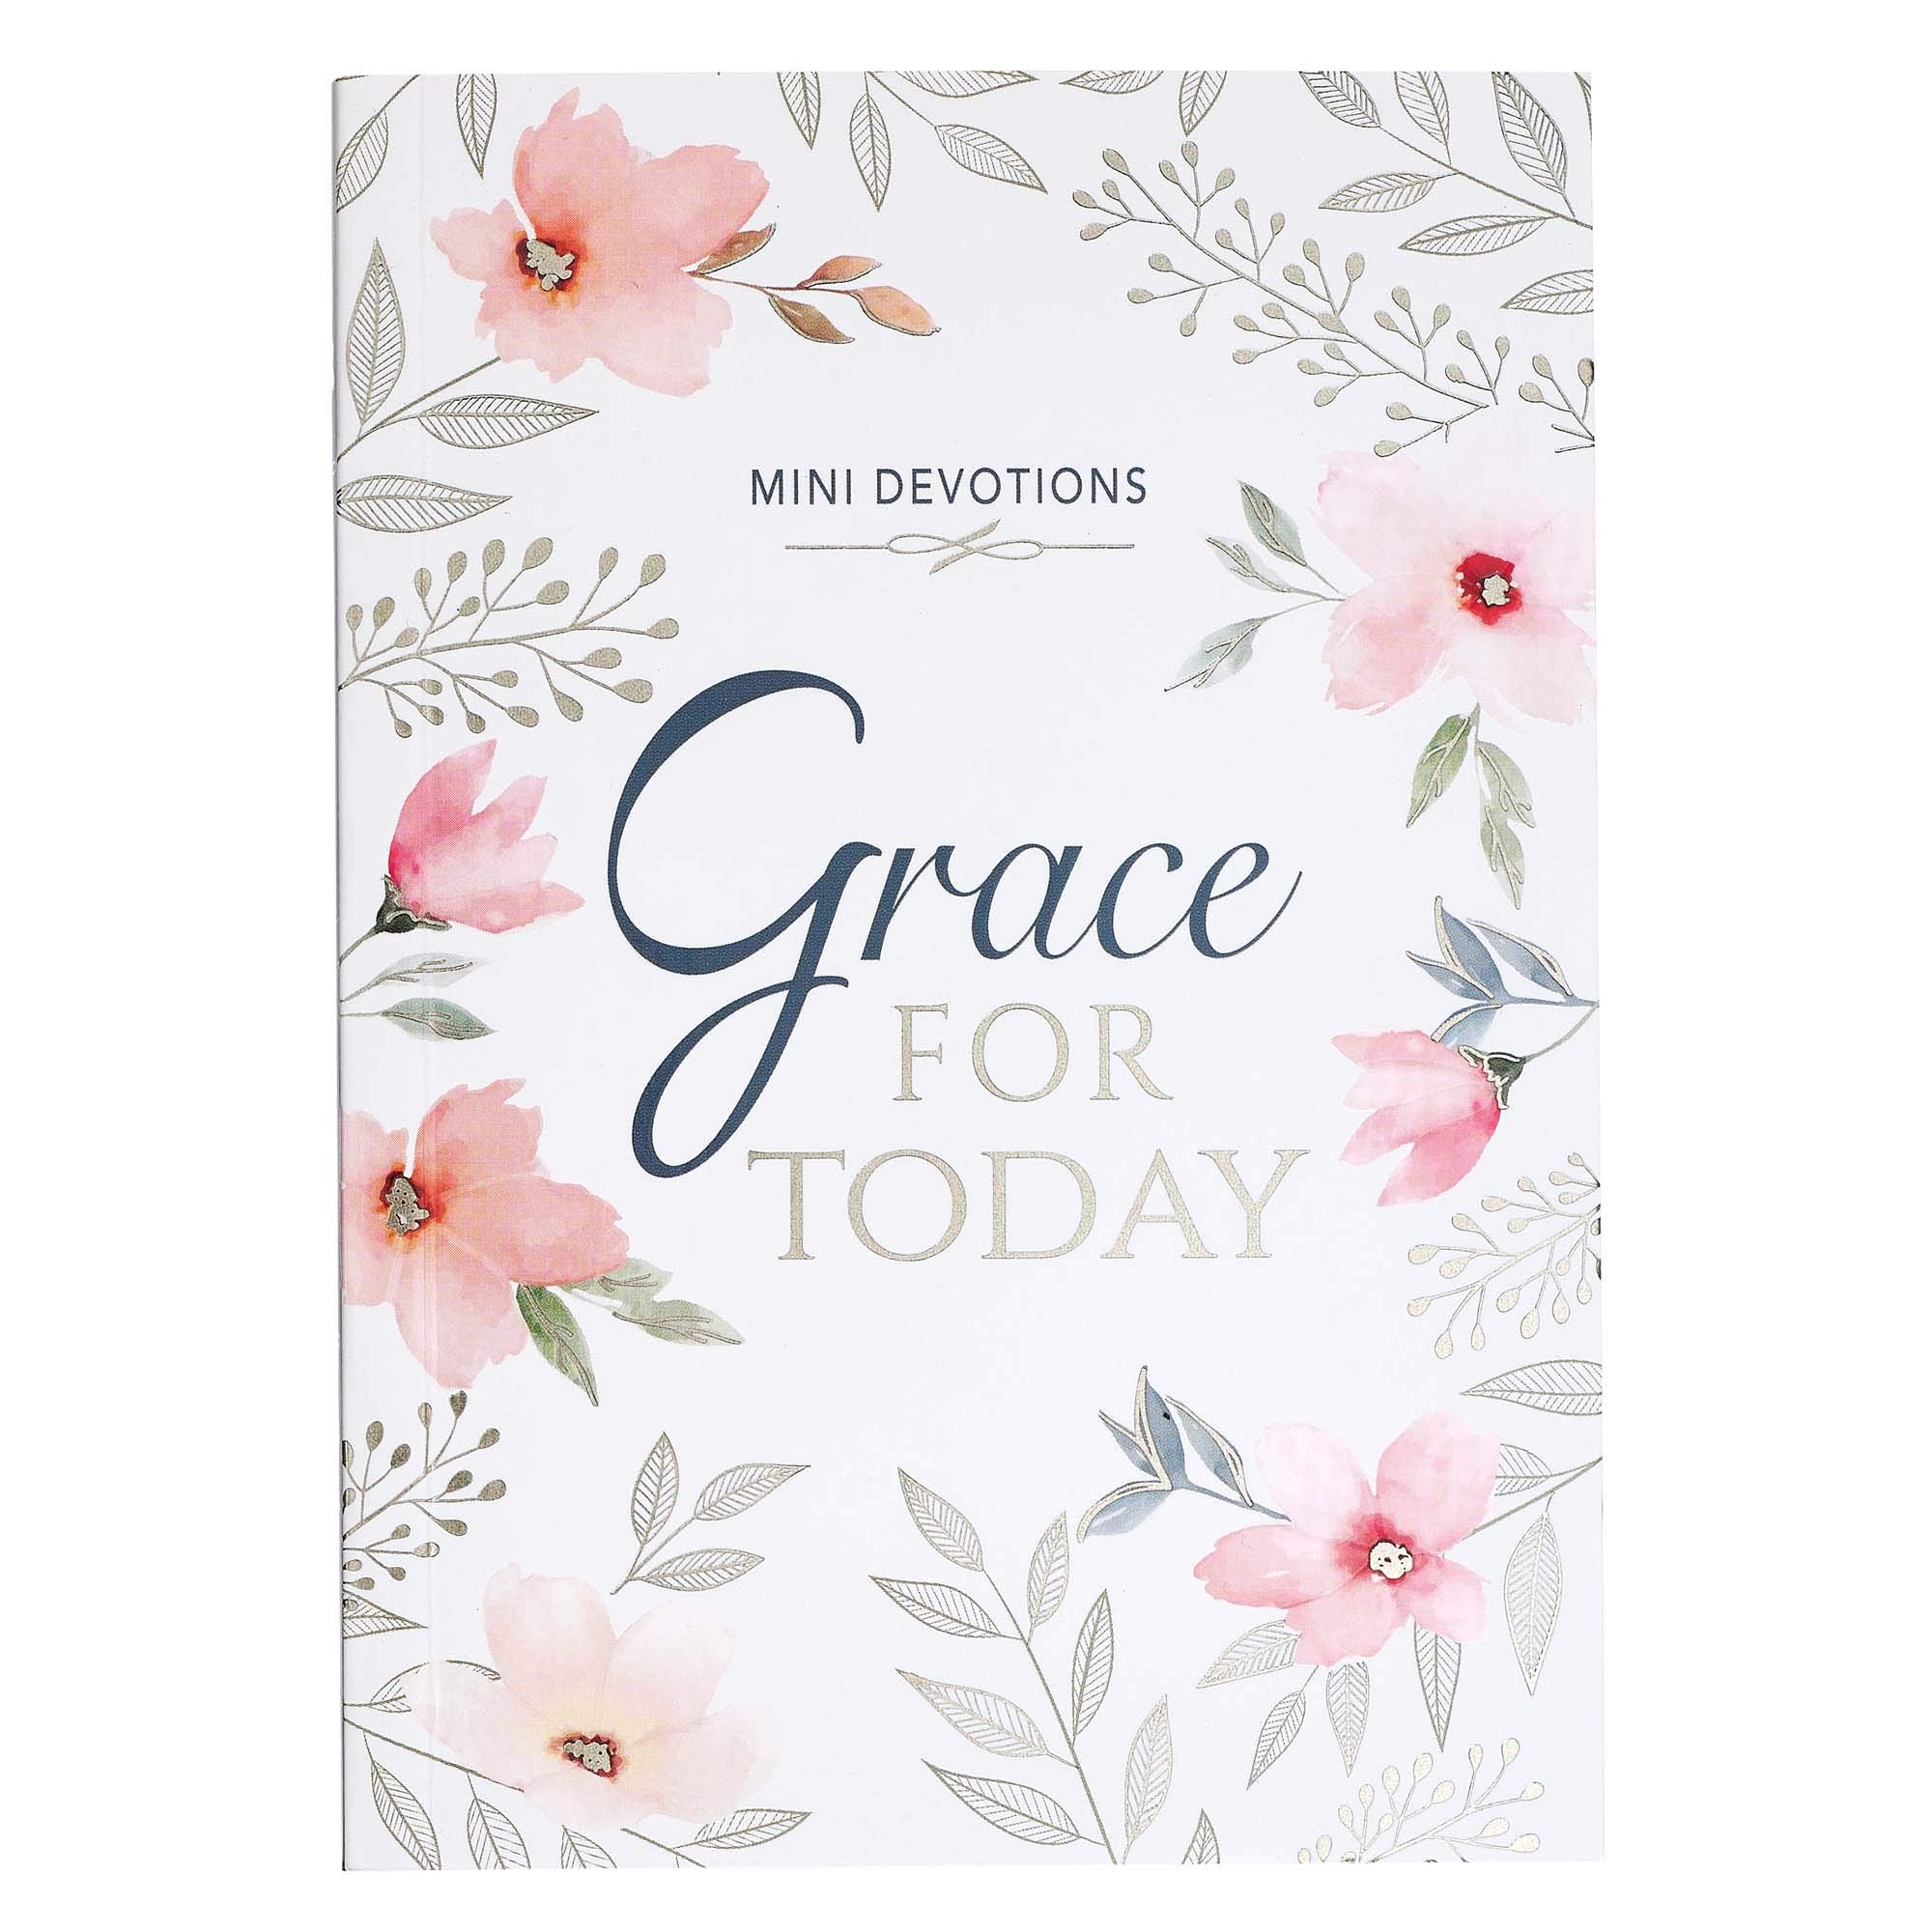 Mini Devotions Grace for Today by Ozrovech, Solly